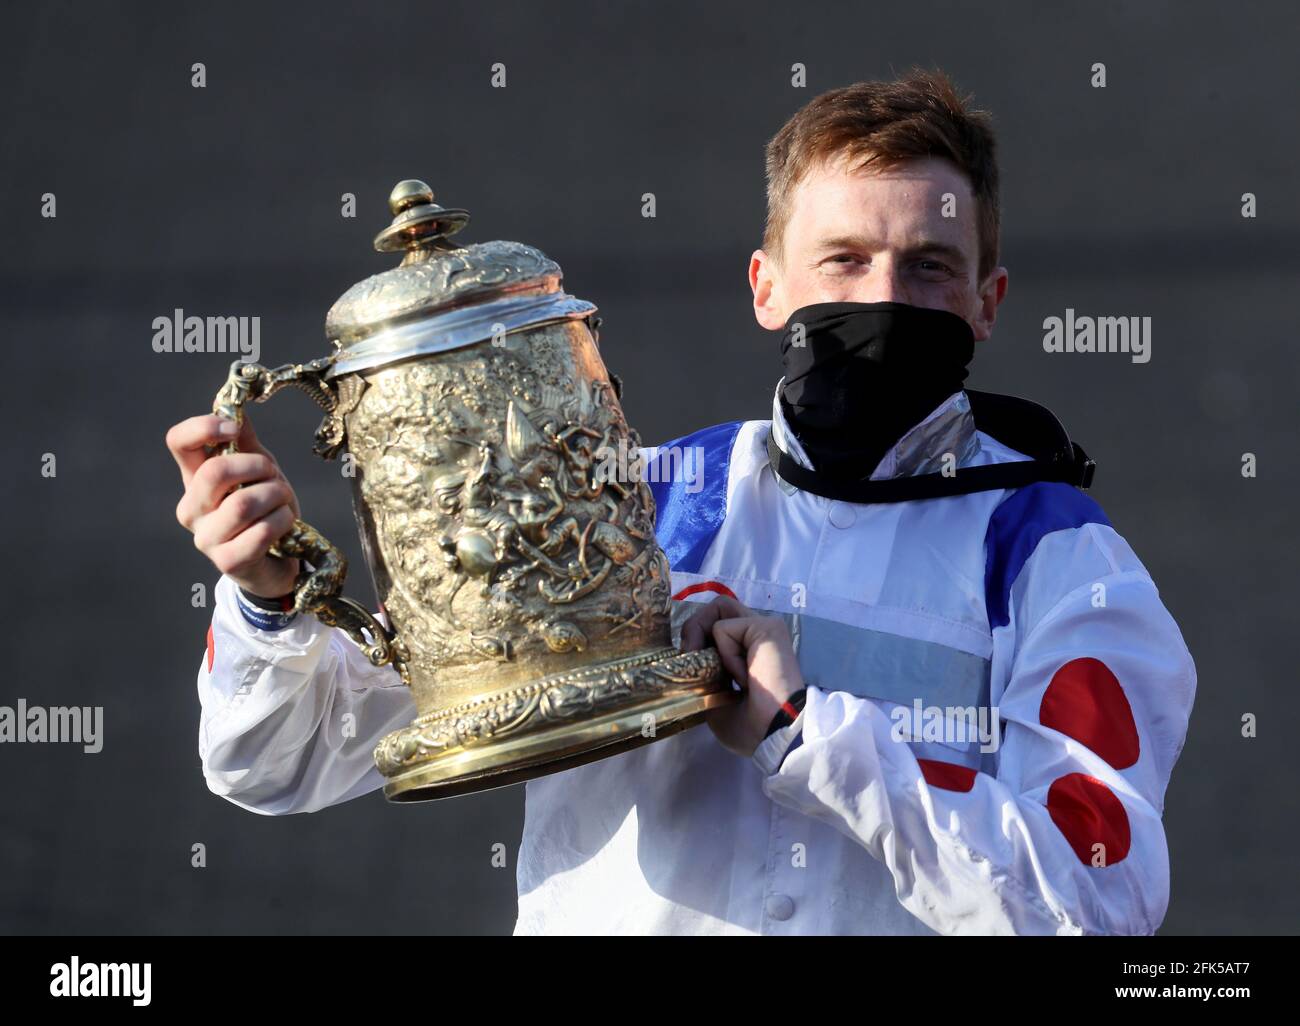 Sam Twiston-Davies celebrates winning The Ladbrokes Punchestown Gold Cup on Clan Des Obeaux during day two of the Punchestown Festival at Punchestown Racecourse in County Kildare, Ireland. Issue date: Wednesday April 28, 2021. Stock Photo